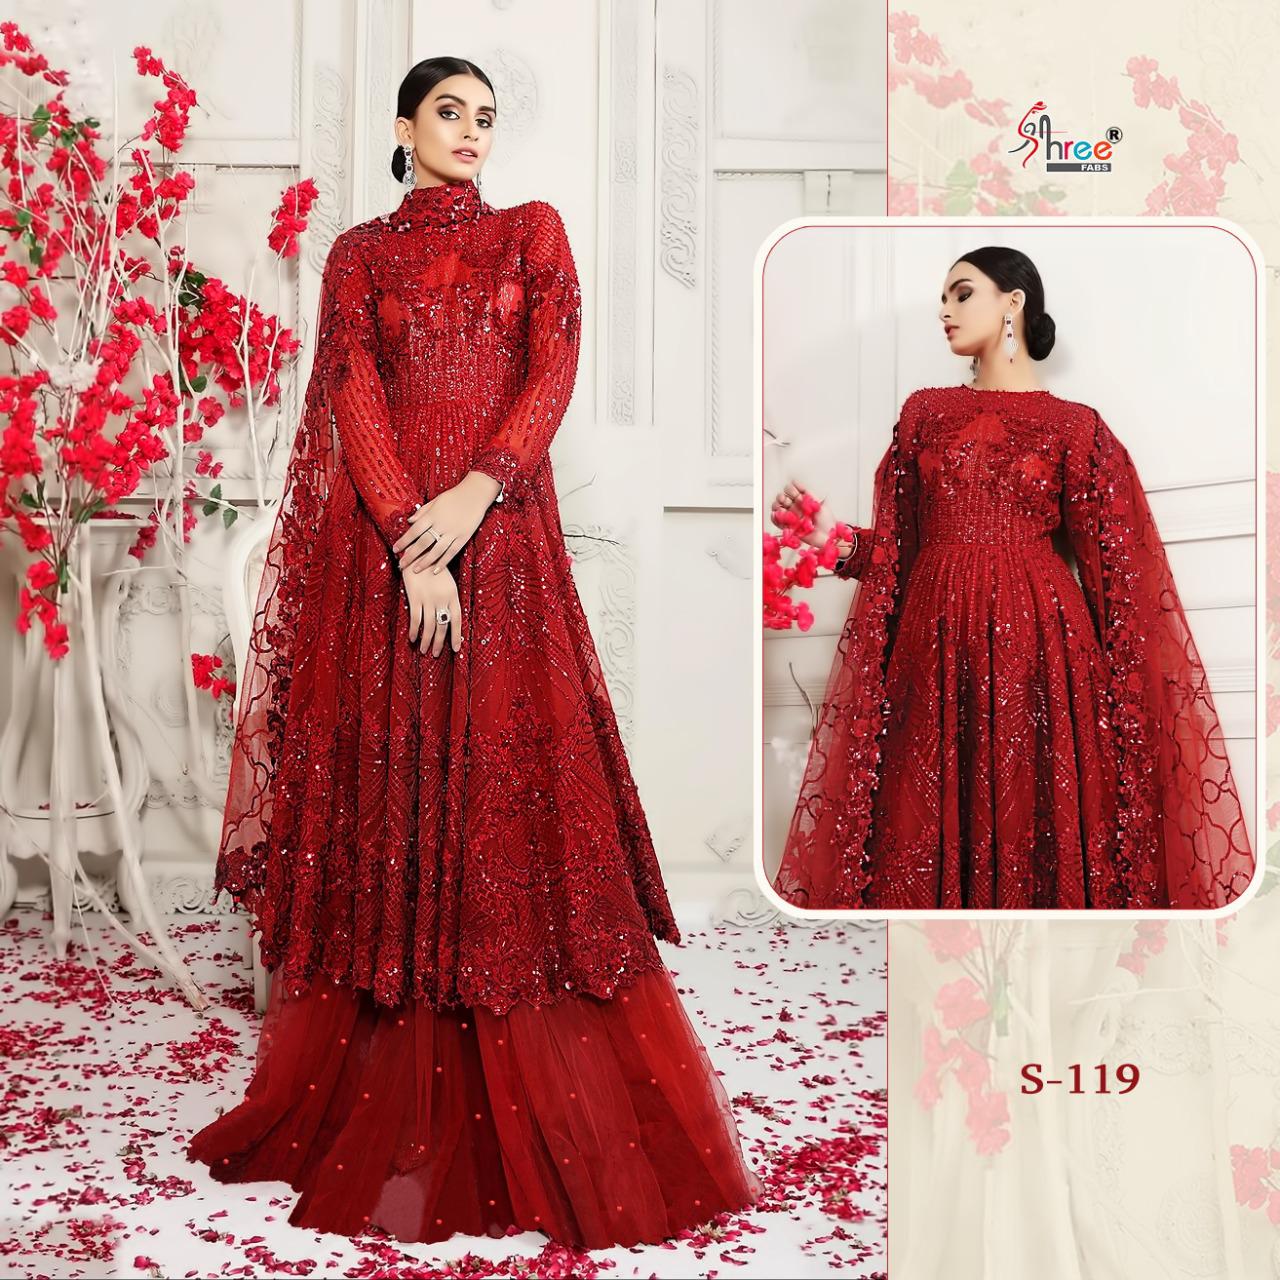 SHREE FABS S 119 PAKISTANI SUITS IN SINGLE PIECE